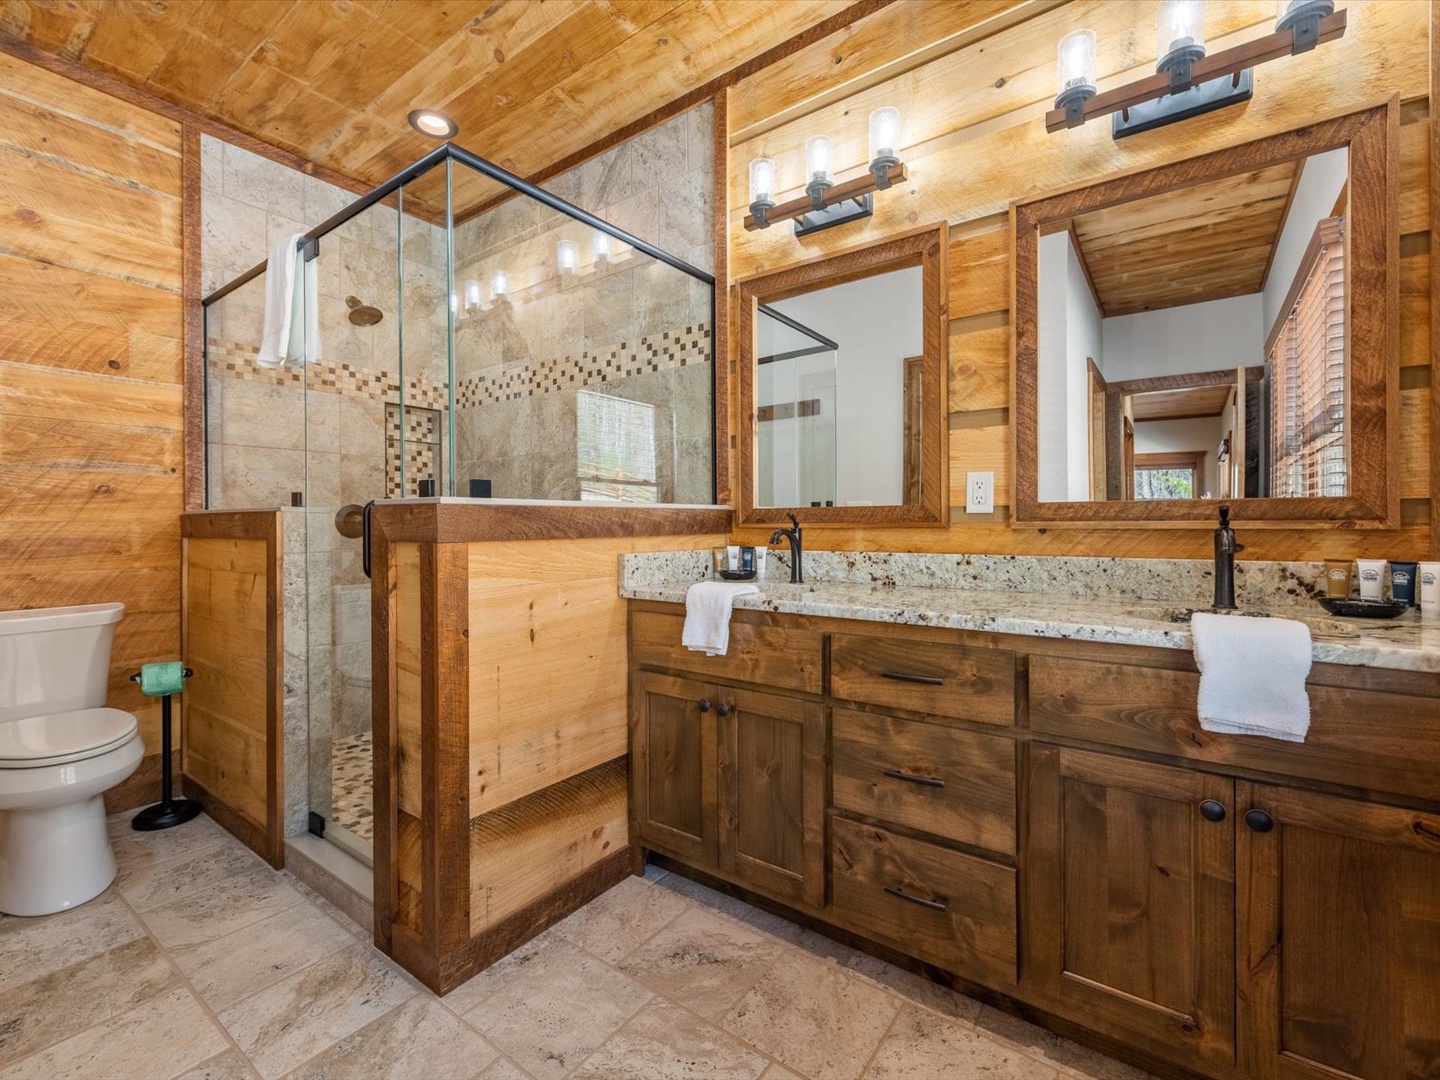 Tranquil Escape of Blue Ridge - Entry Level Primary King Bedroom Private Bathroom